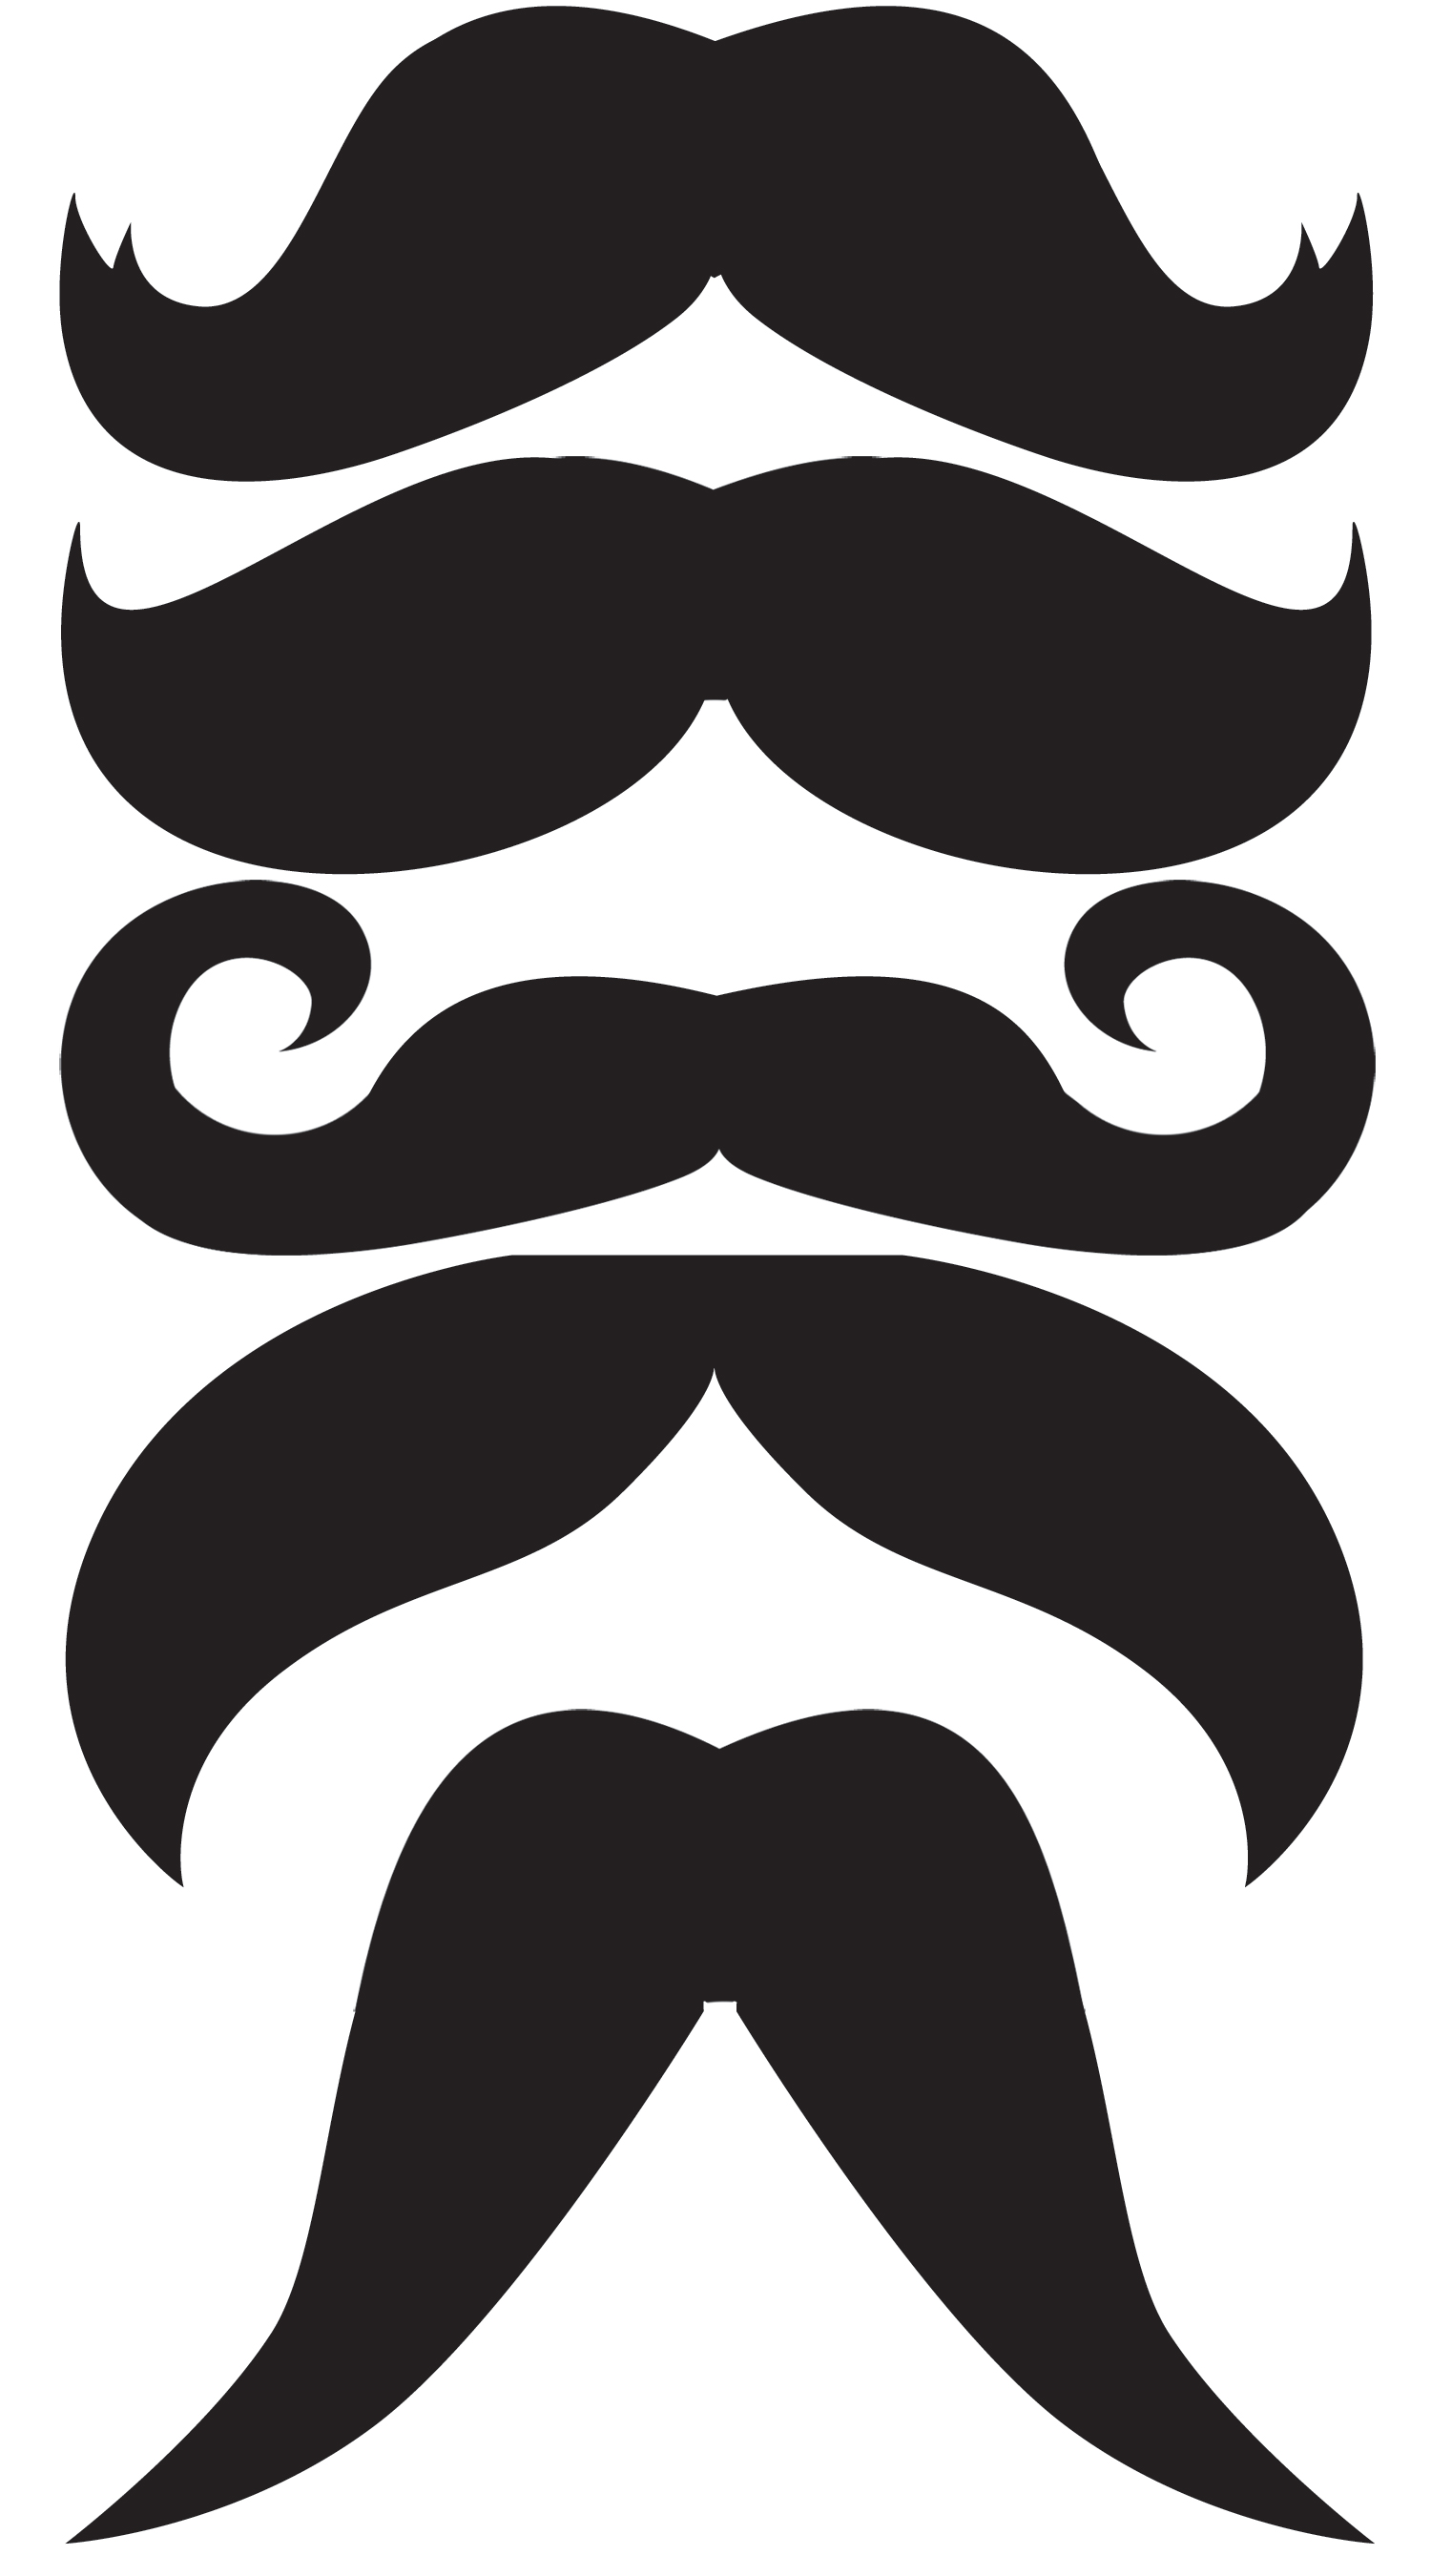 DIY: Mustaches Photo Booth Prop » Tiffany Kelley Photography & Design